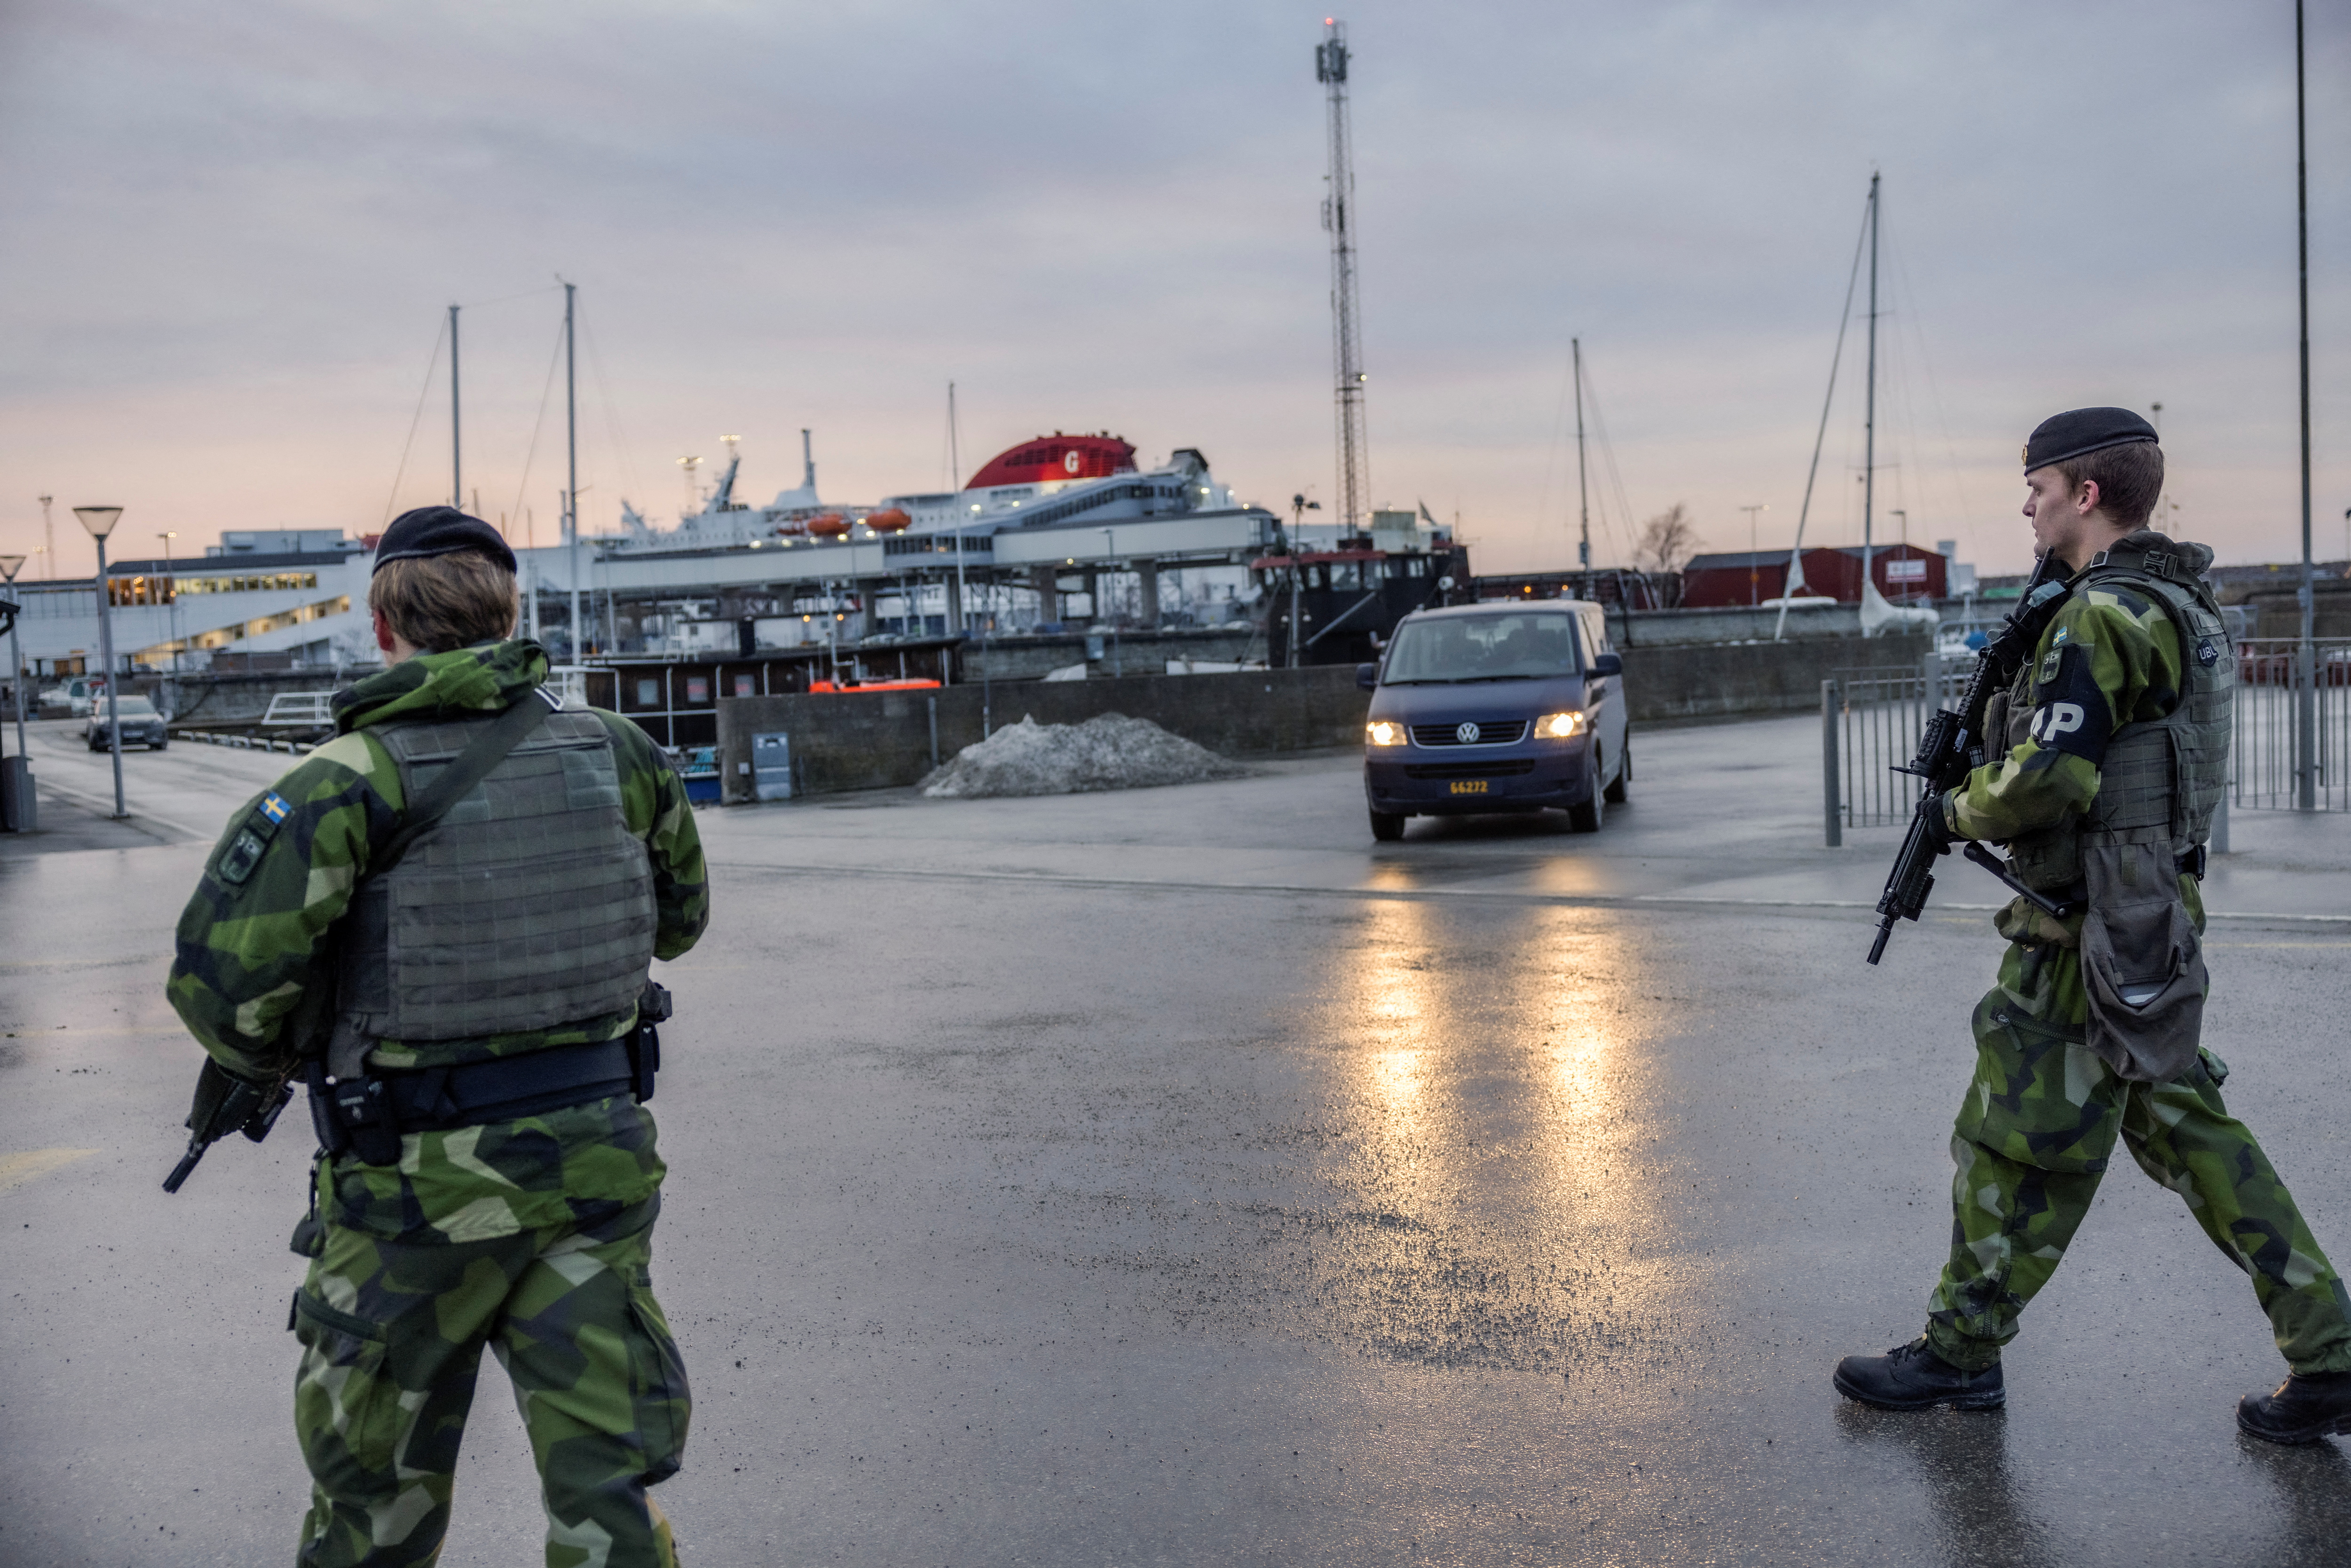 Soldiers from Gotland's regiment patrol Visby harbour, amid increased tensions between NATO and Russia over Ukraine, on the Swedish island of Gotland, Sweden, 13 January 2022. Picture taken January 13, 2022.  TT News Agency/Karl Melander via REUTERS 